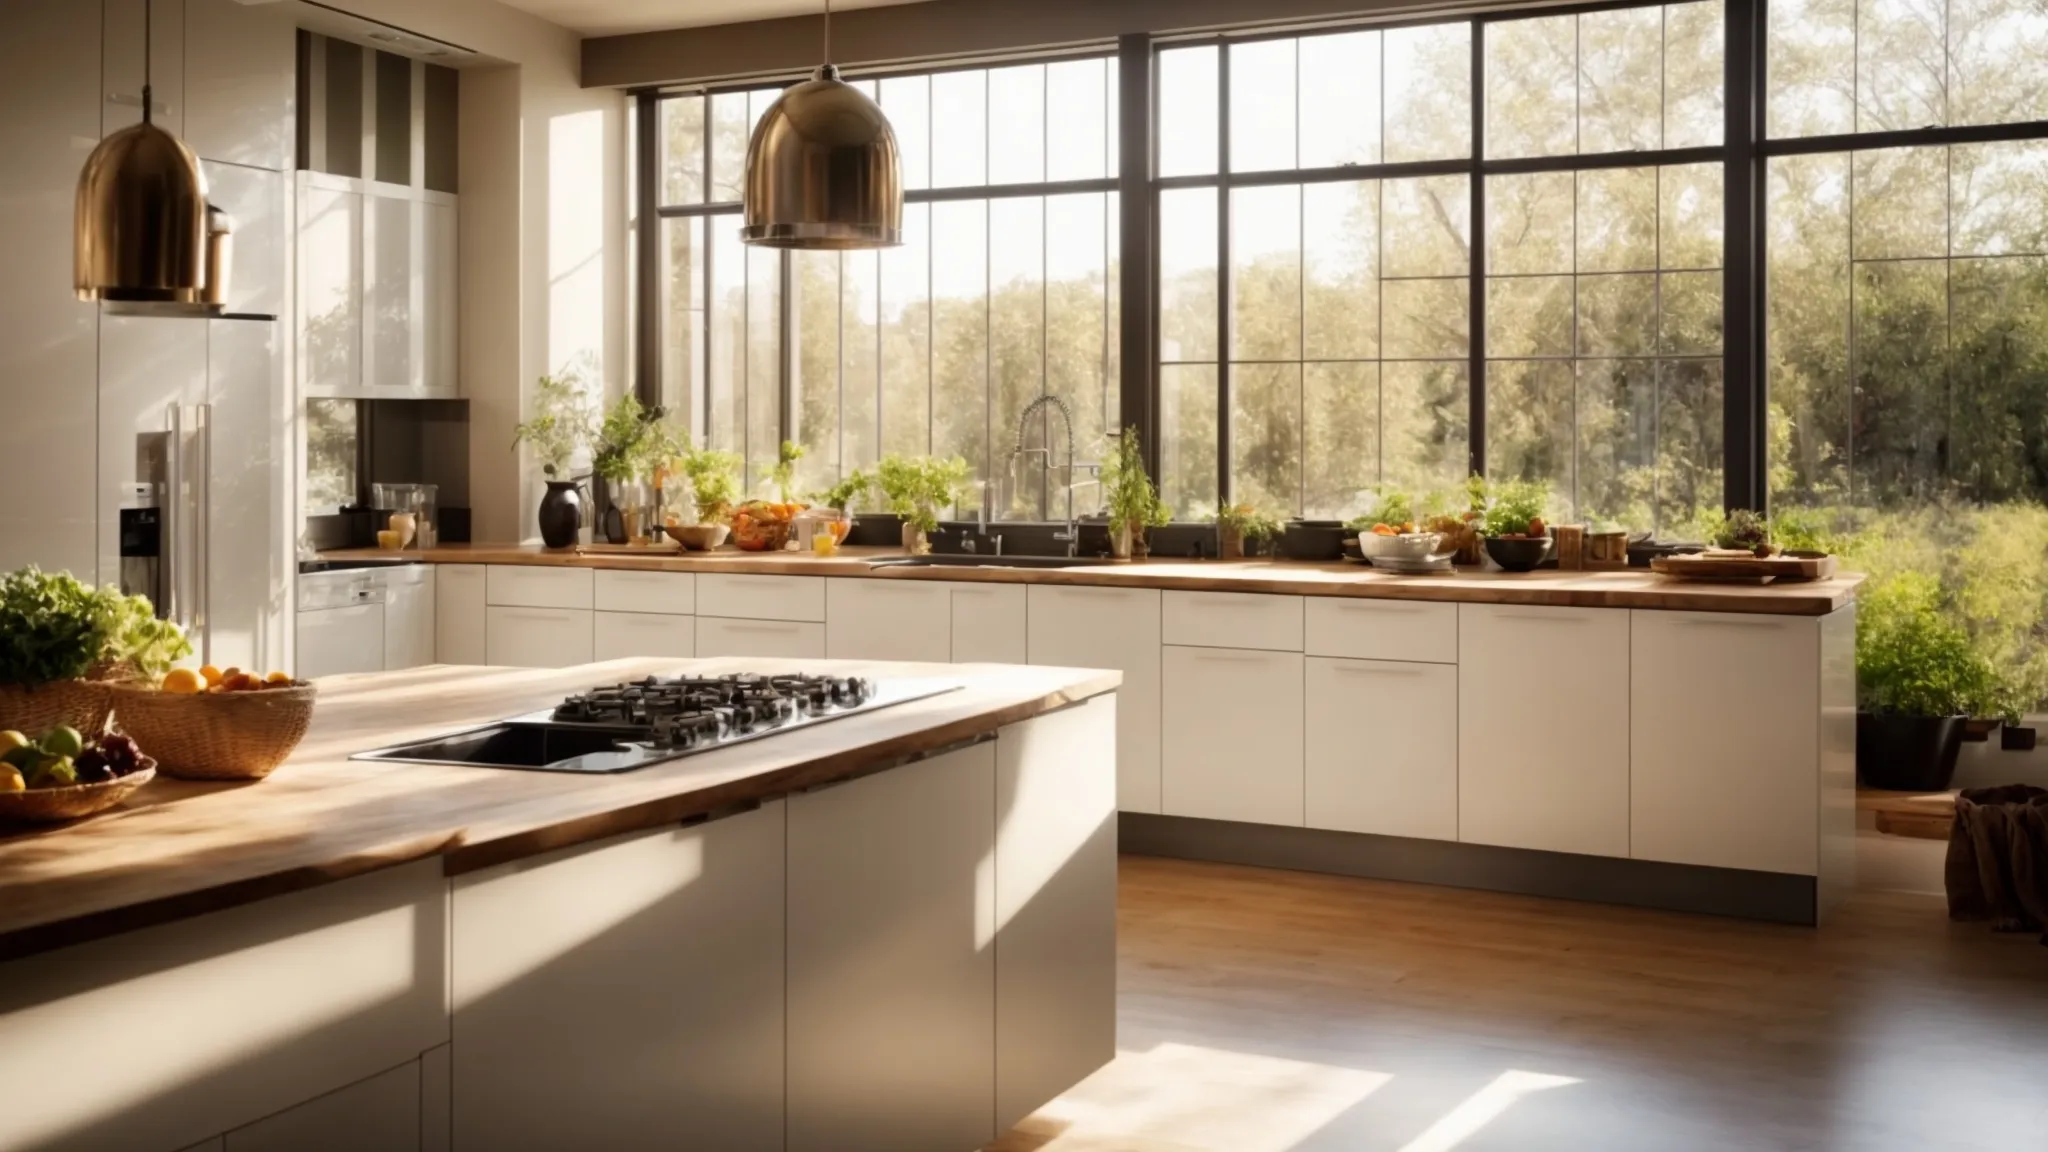 a spacious kitchen bathed in sunlight, with large windows casting a warm glow on sleek surfaces.